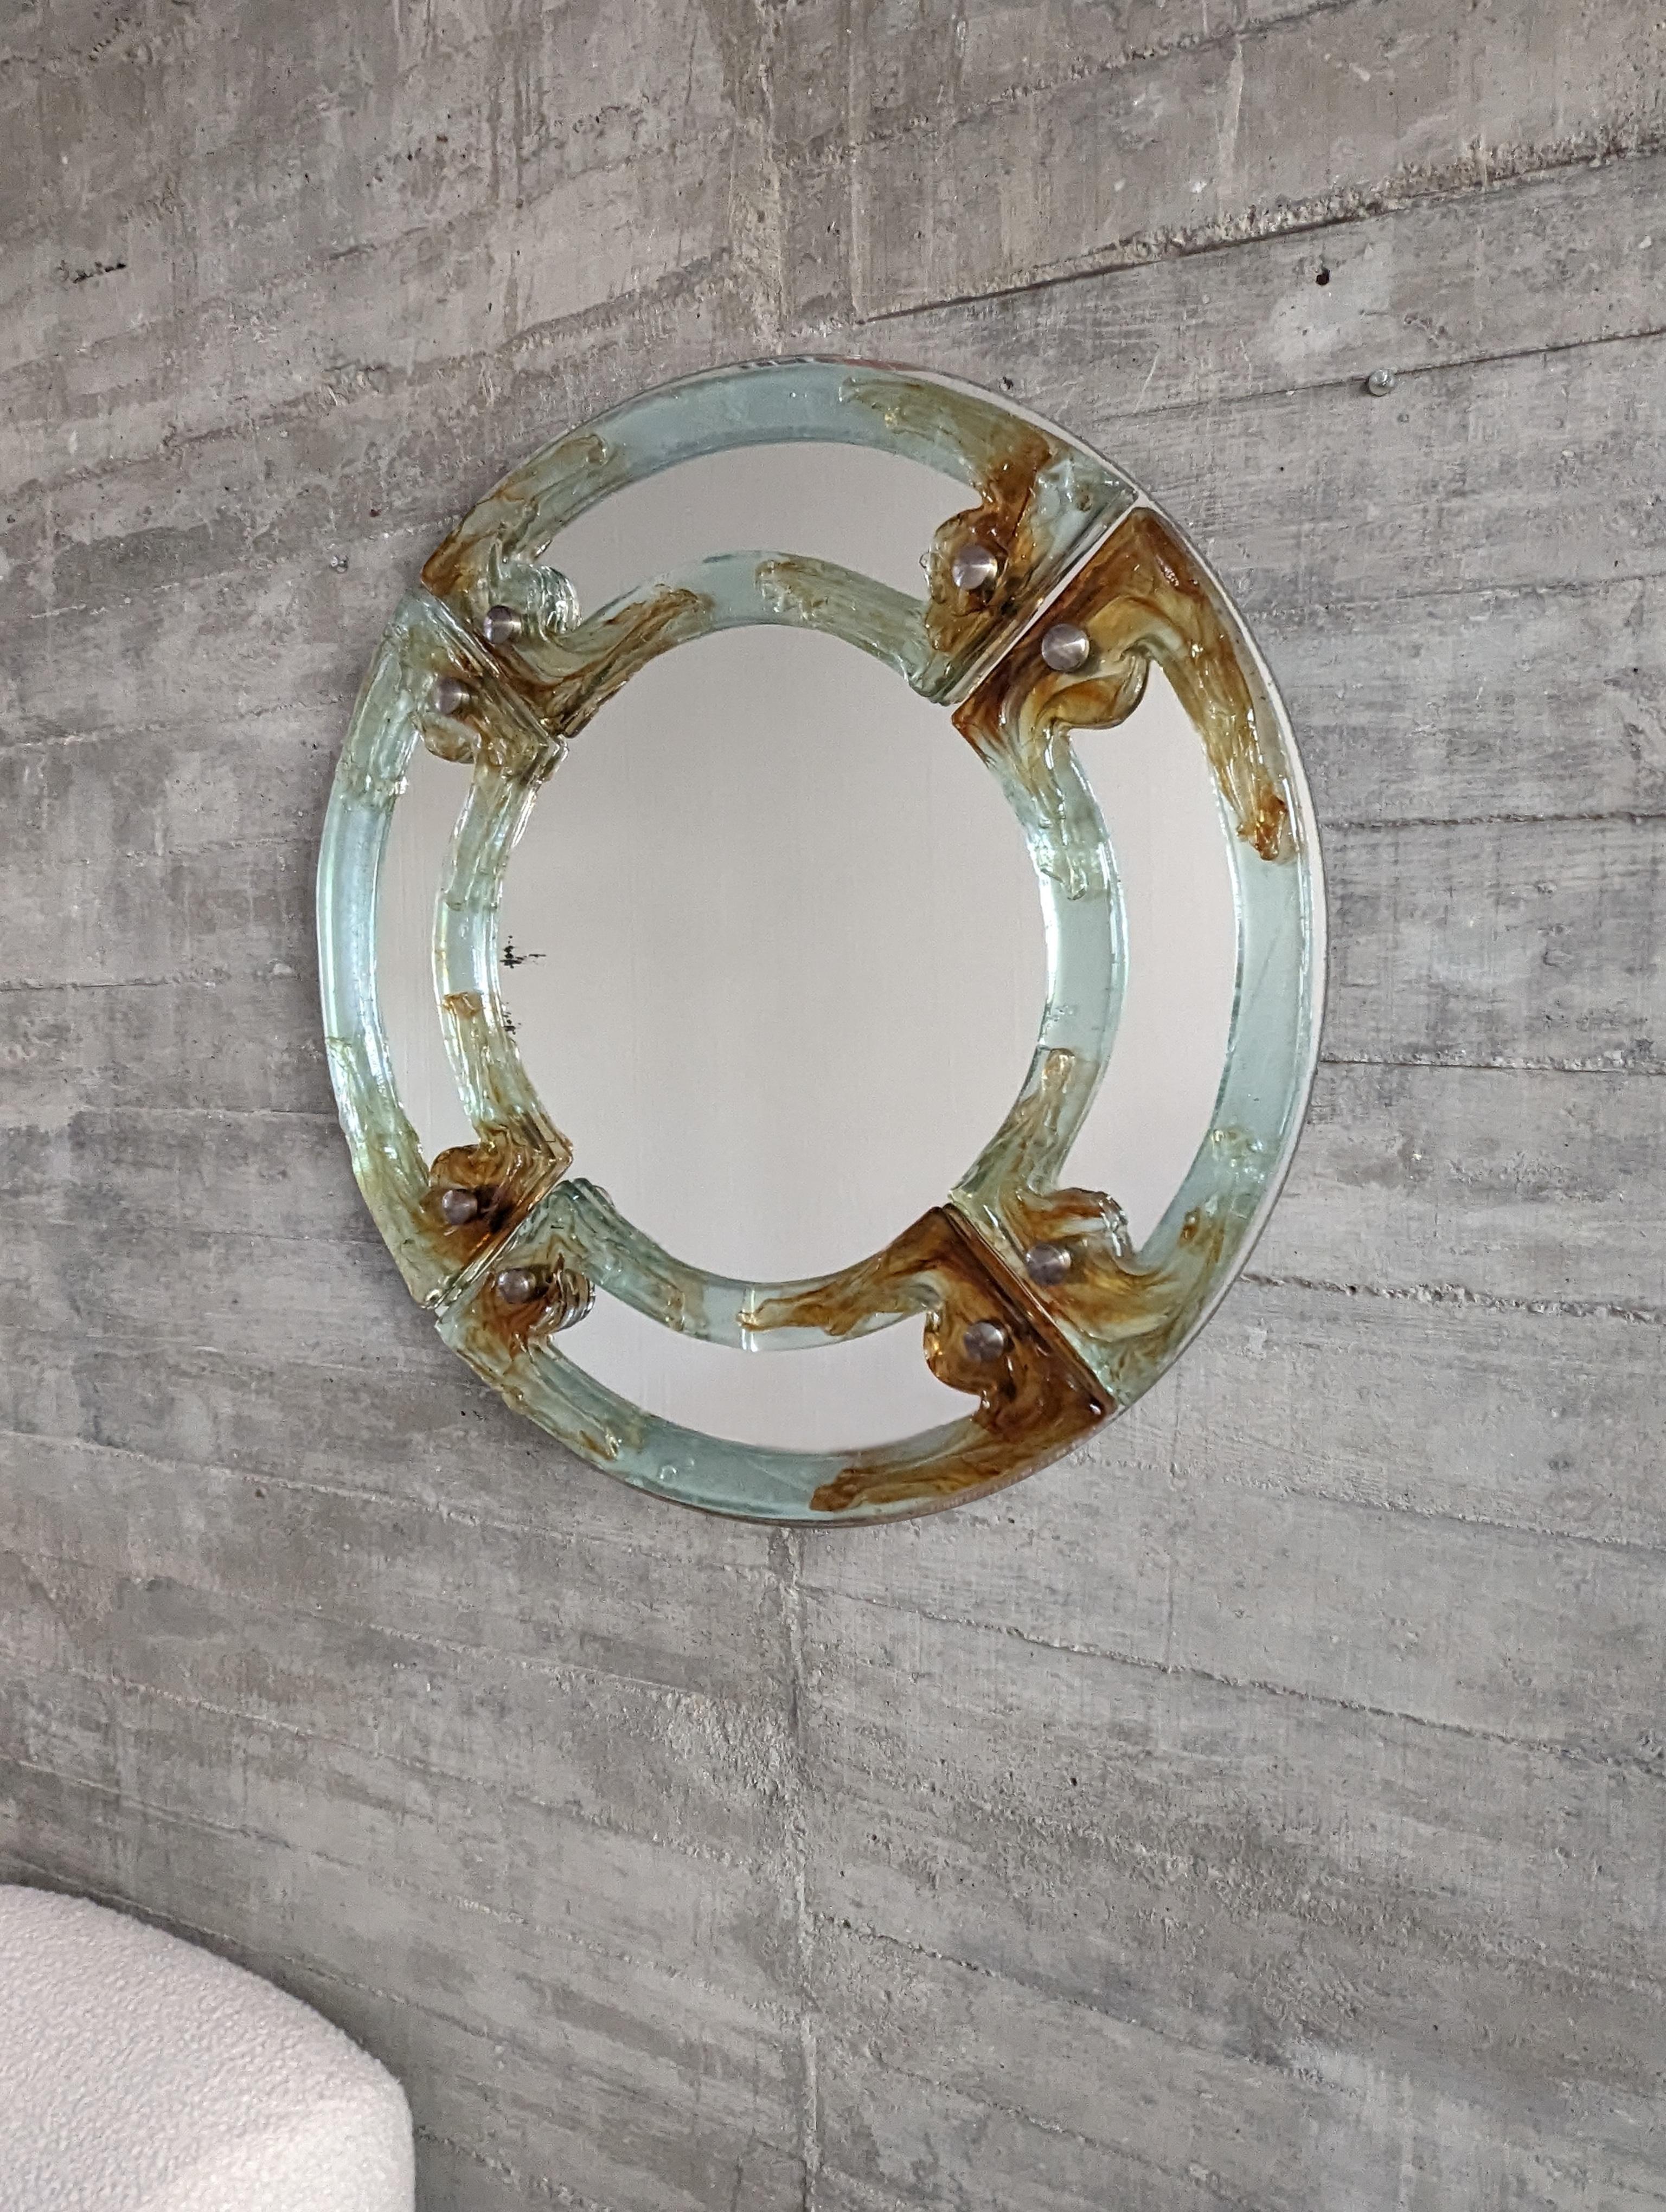 Spectacular round Murano glass mirror in amber tones is an authentic treasure from the 1960s. Its exquisite Murano glass reflects the rich artisanal heritage of Venice, with a design that captures the essence of the golden age of Italian